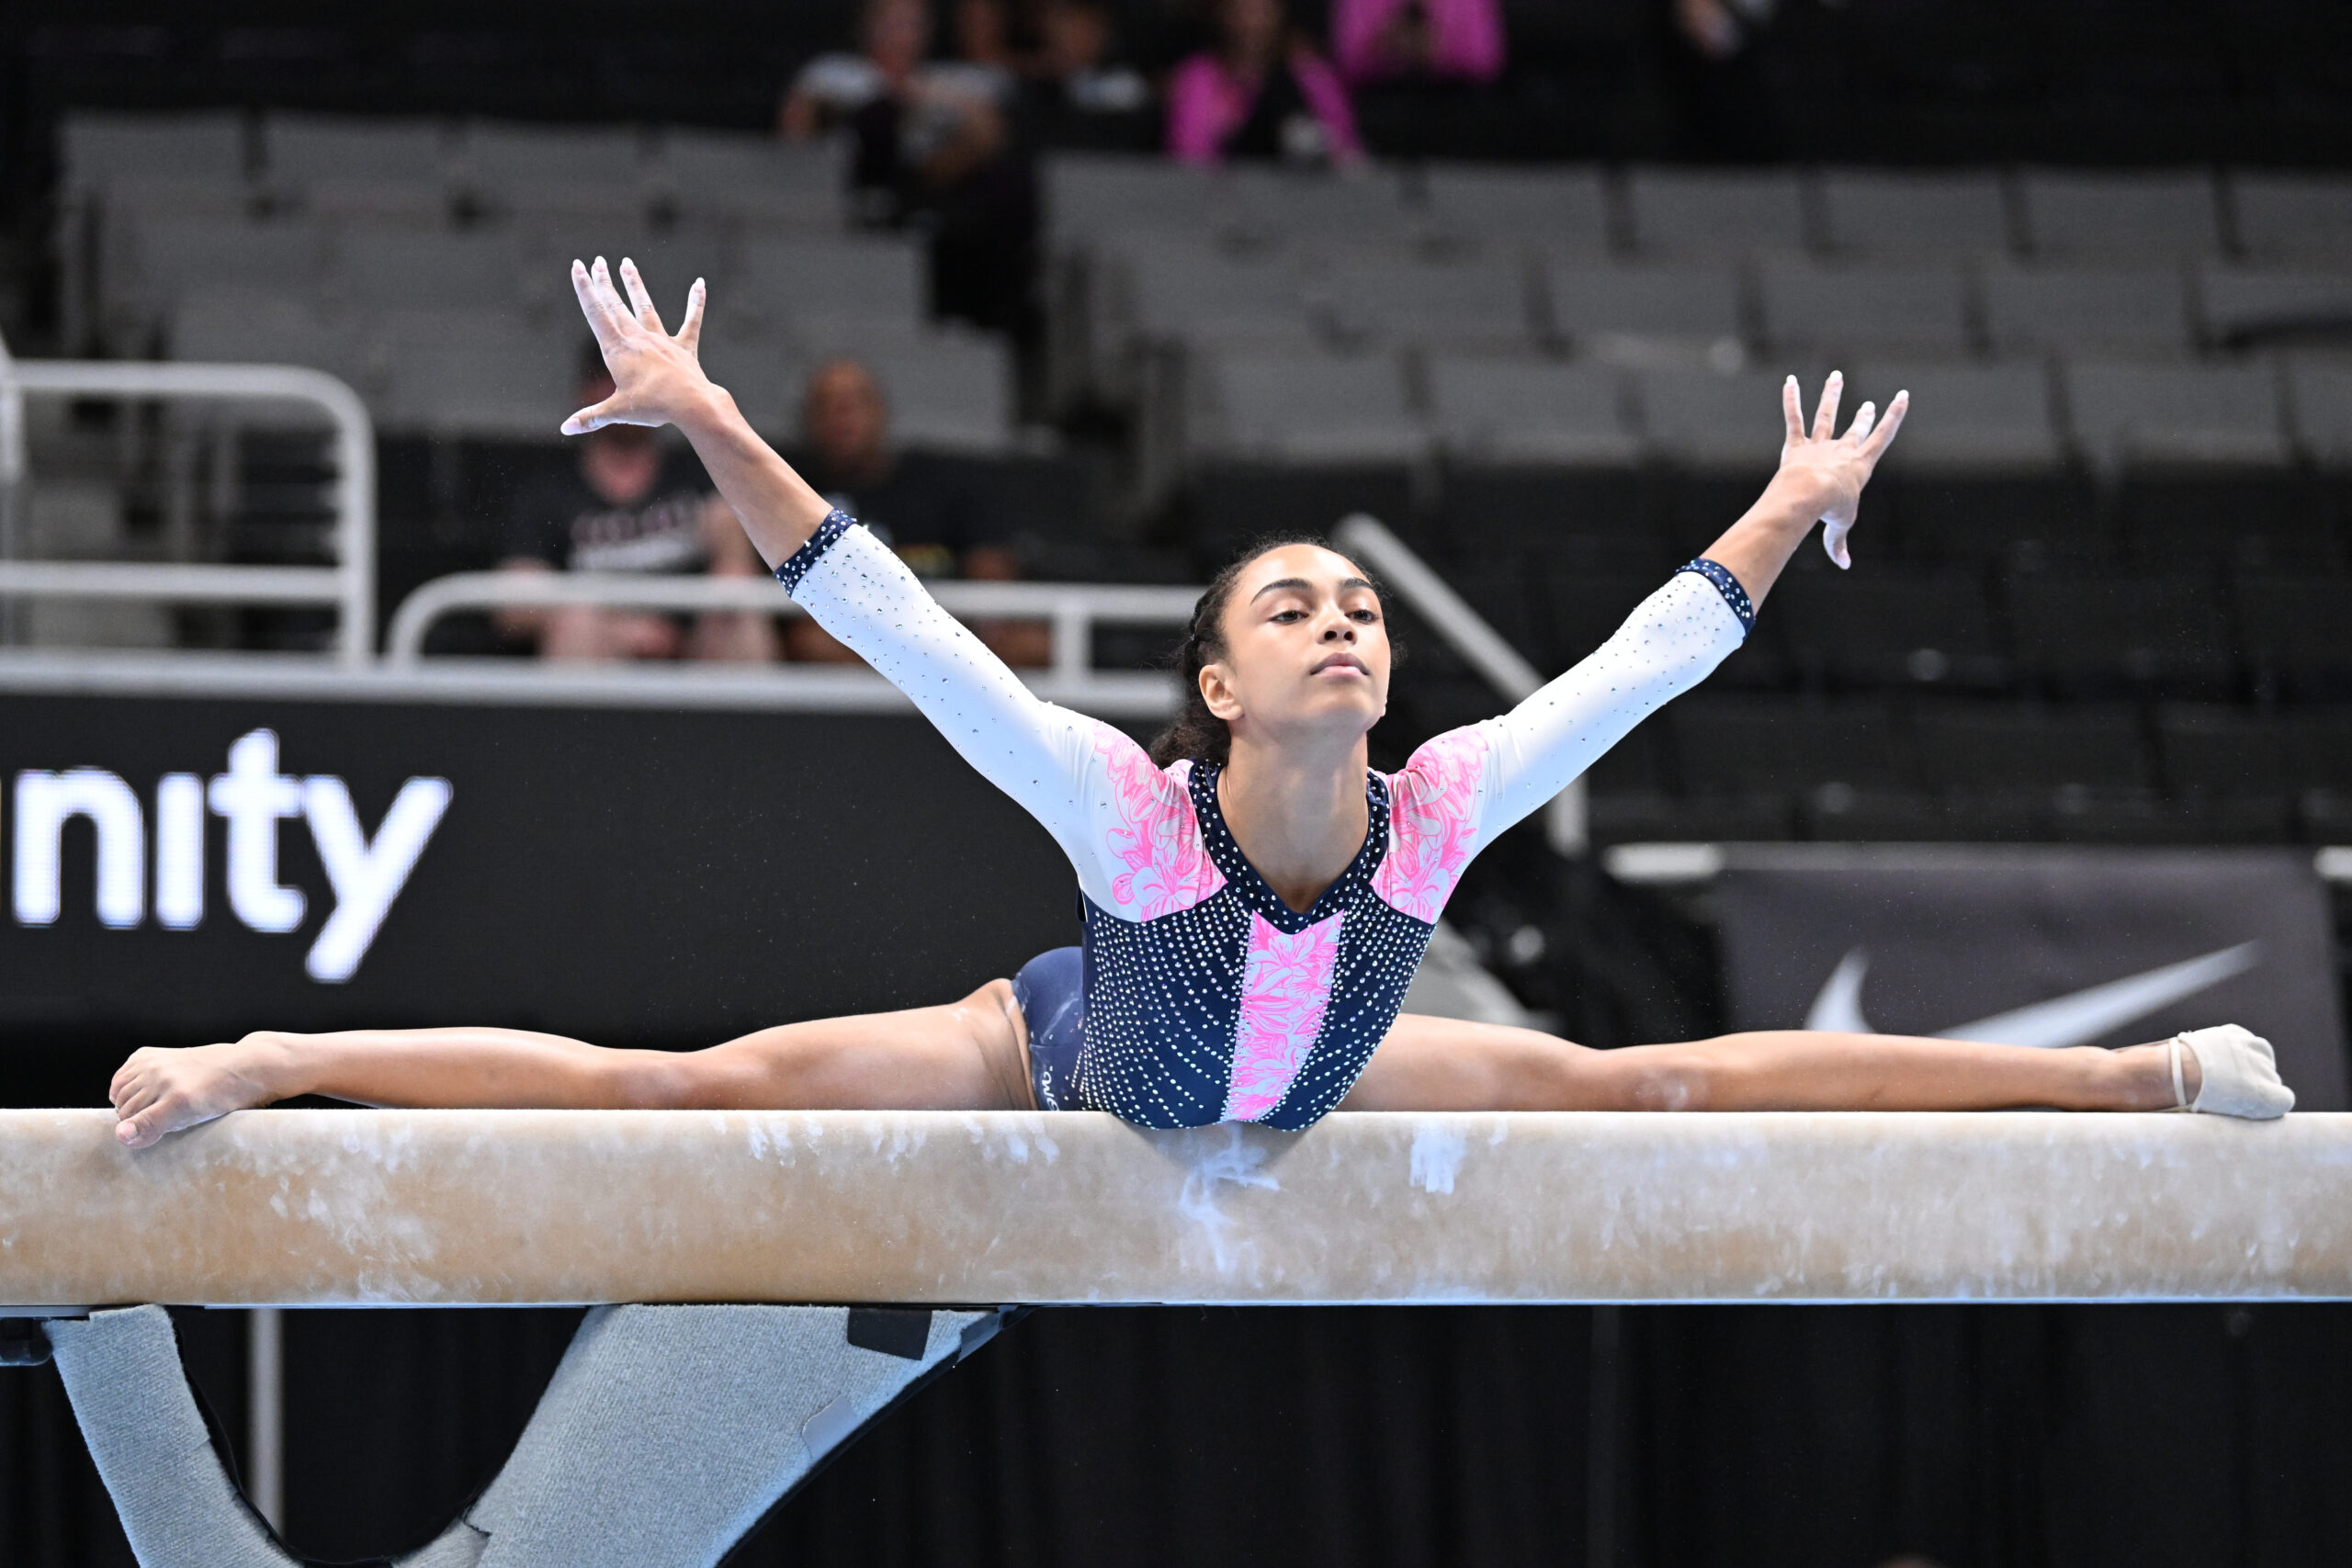 Hezly Rivera mounts beam on Day 1 of junior women's competition at the 2023 Xfinity U.S. Gymnastics Championships.